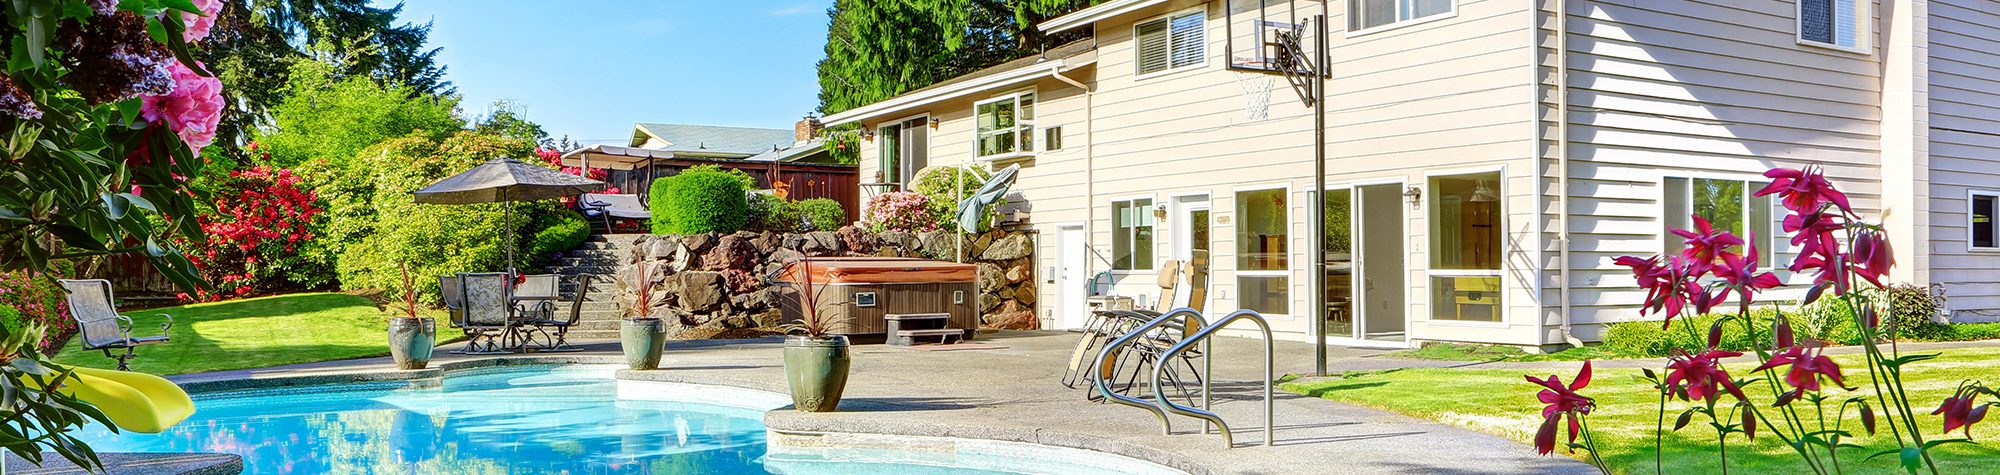 5 pool safety tips for keeping your backyard oasis safe this summer